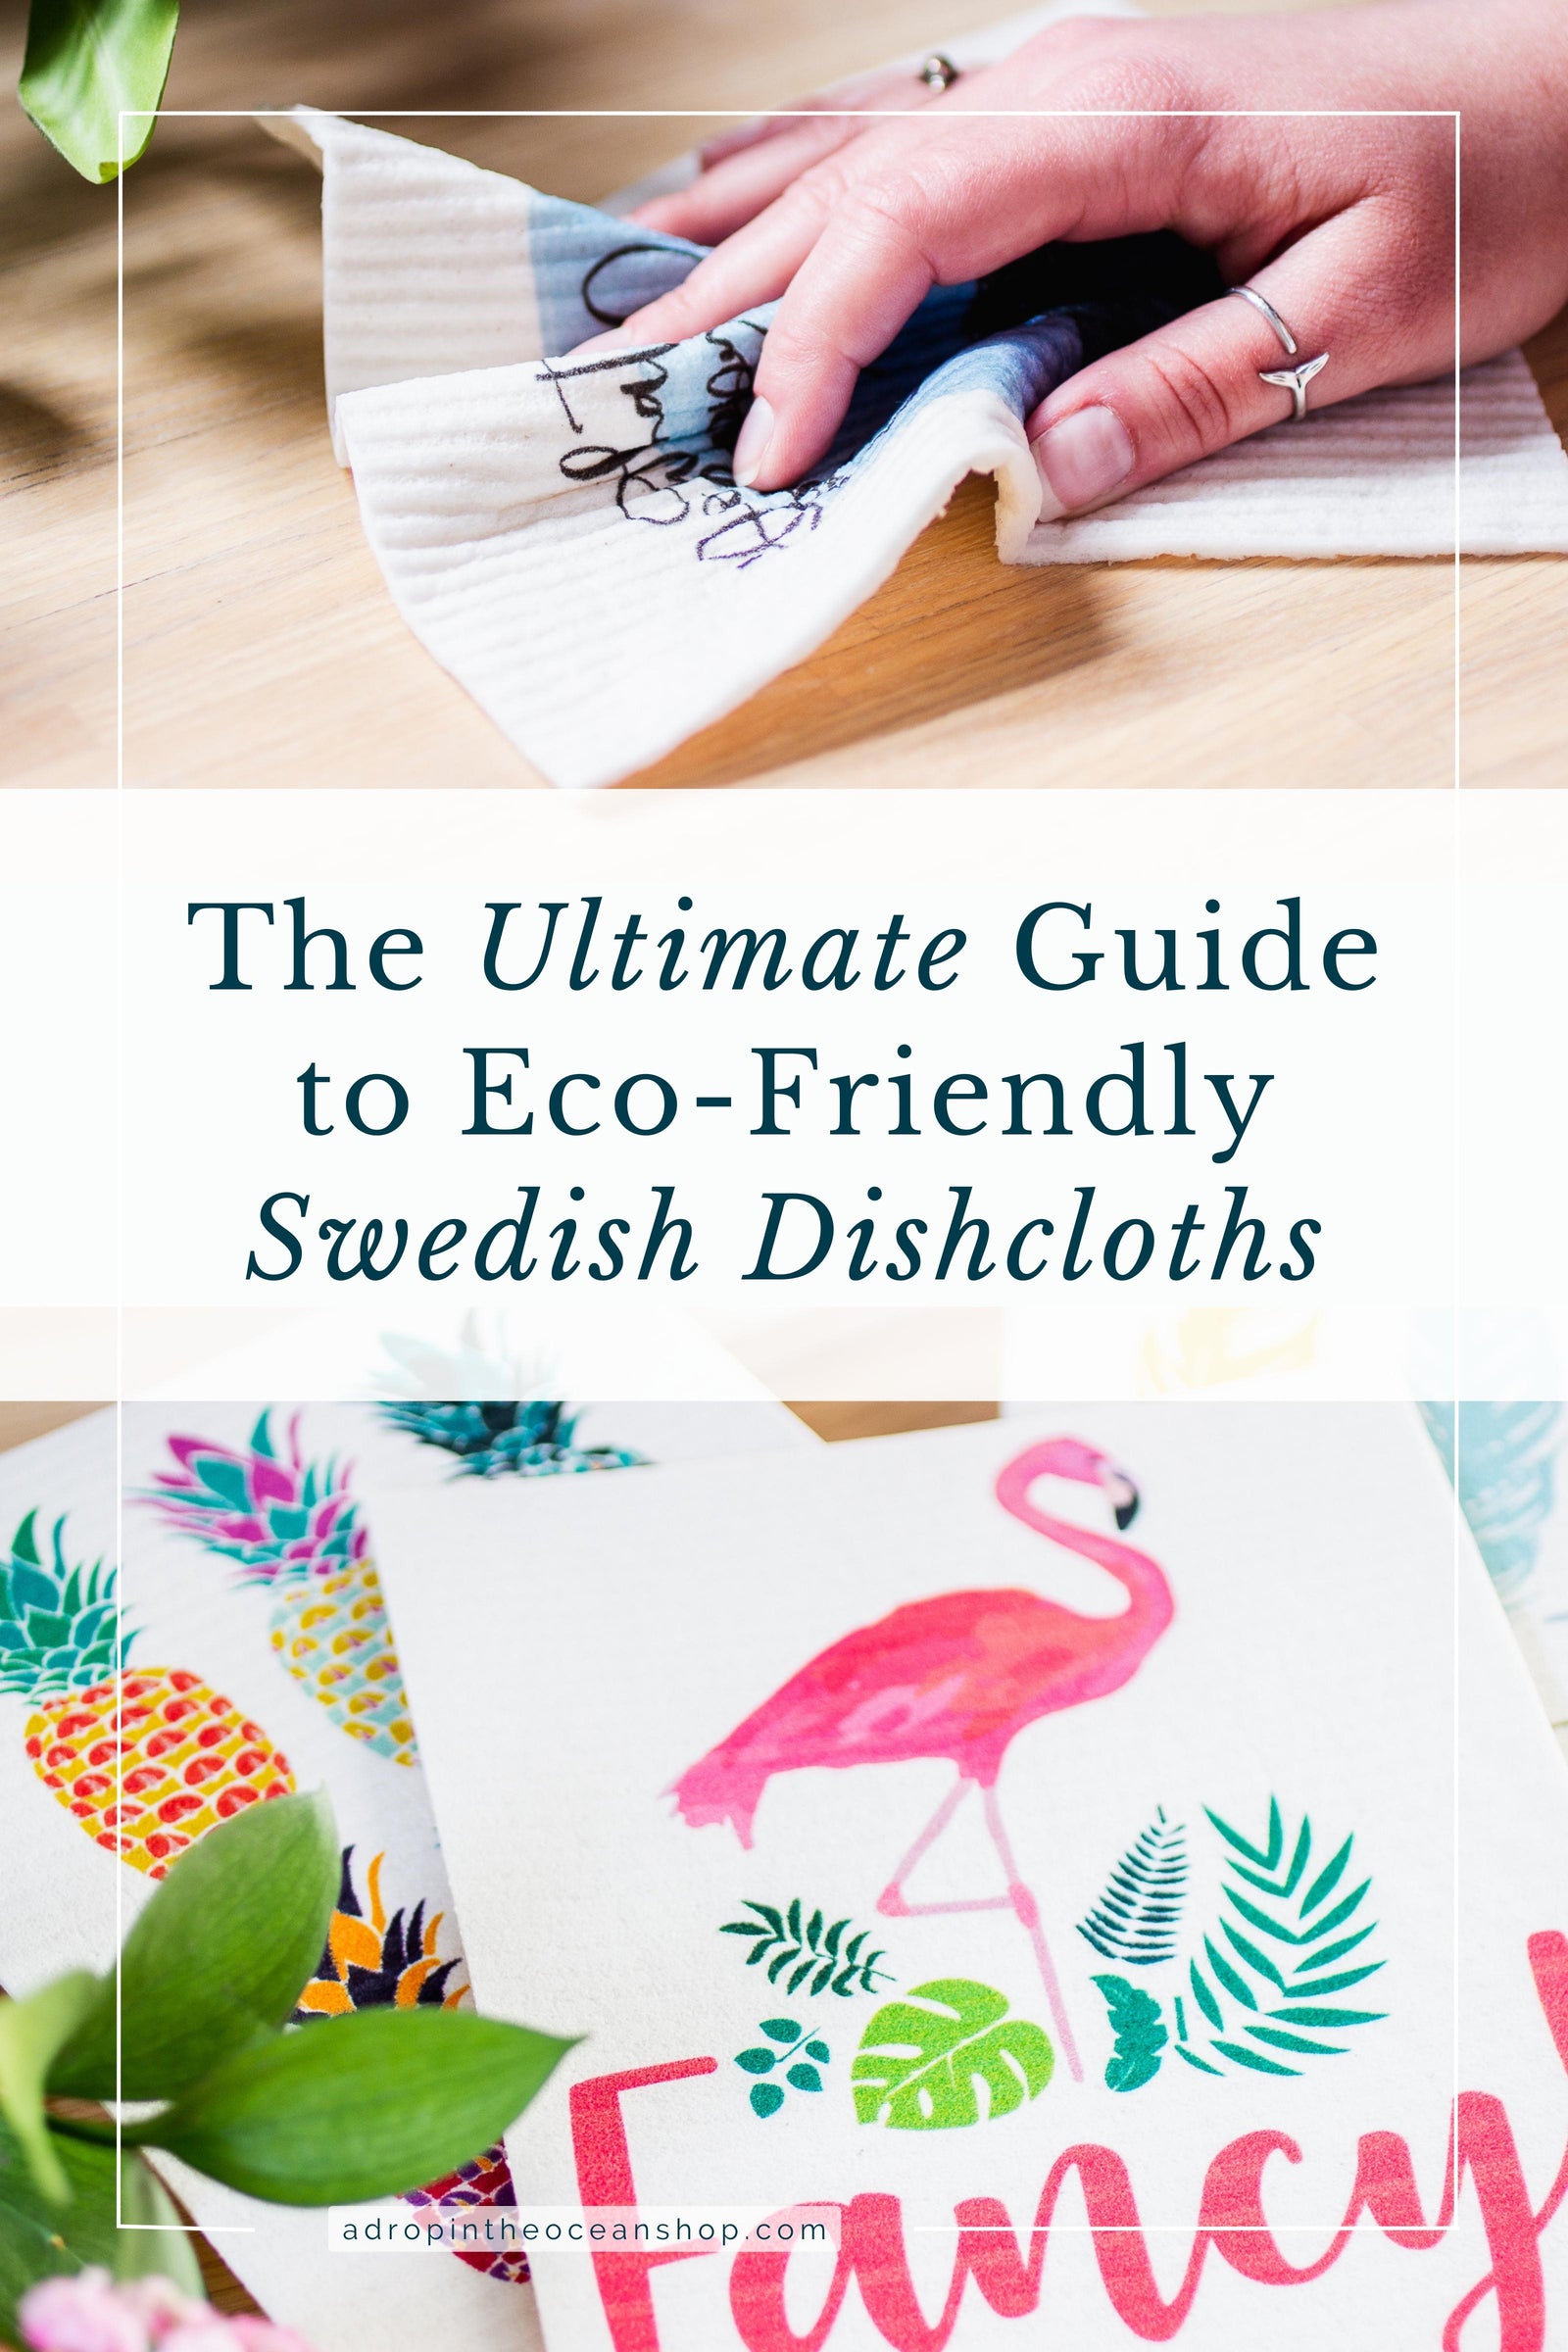 A Drop in the Ocean Zero Waste Store: The Ultimate Guide to Swedish Dishcloths